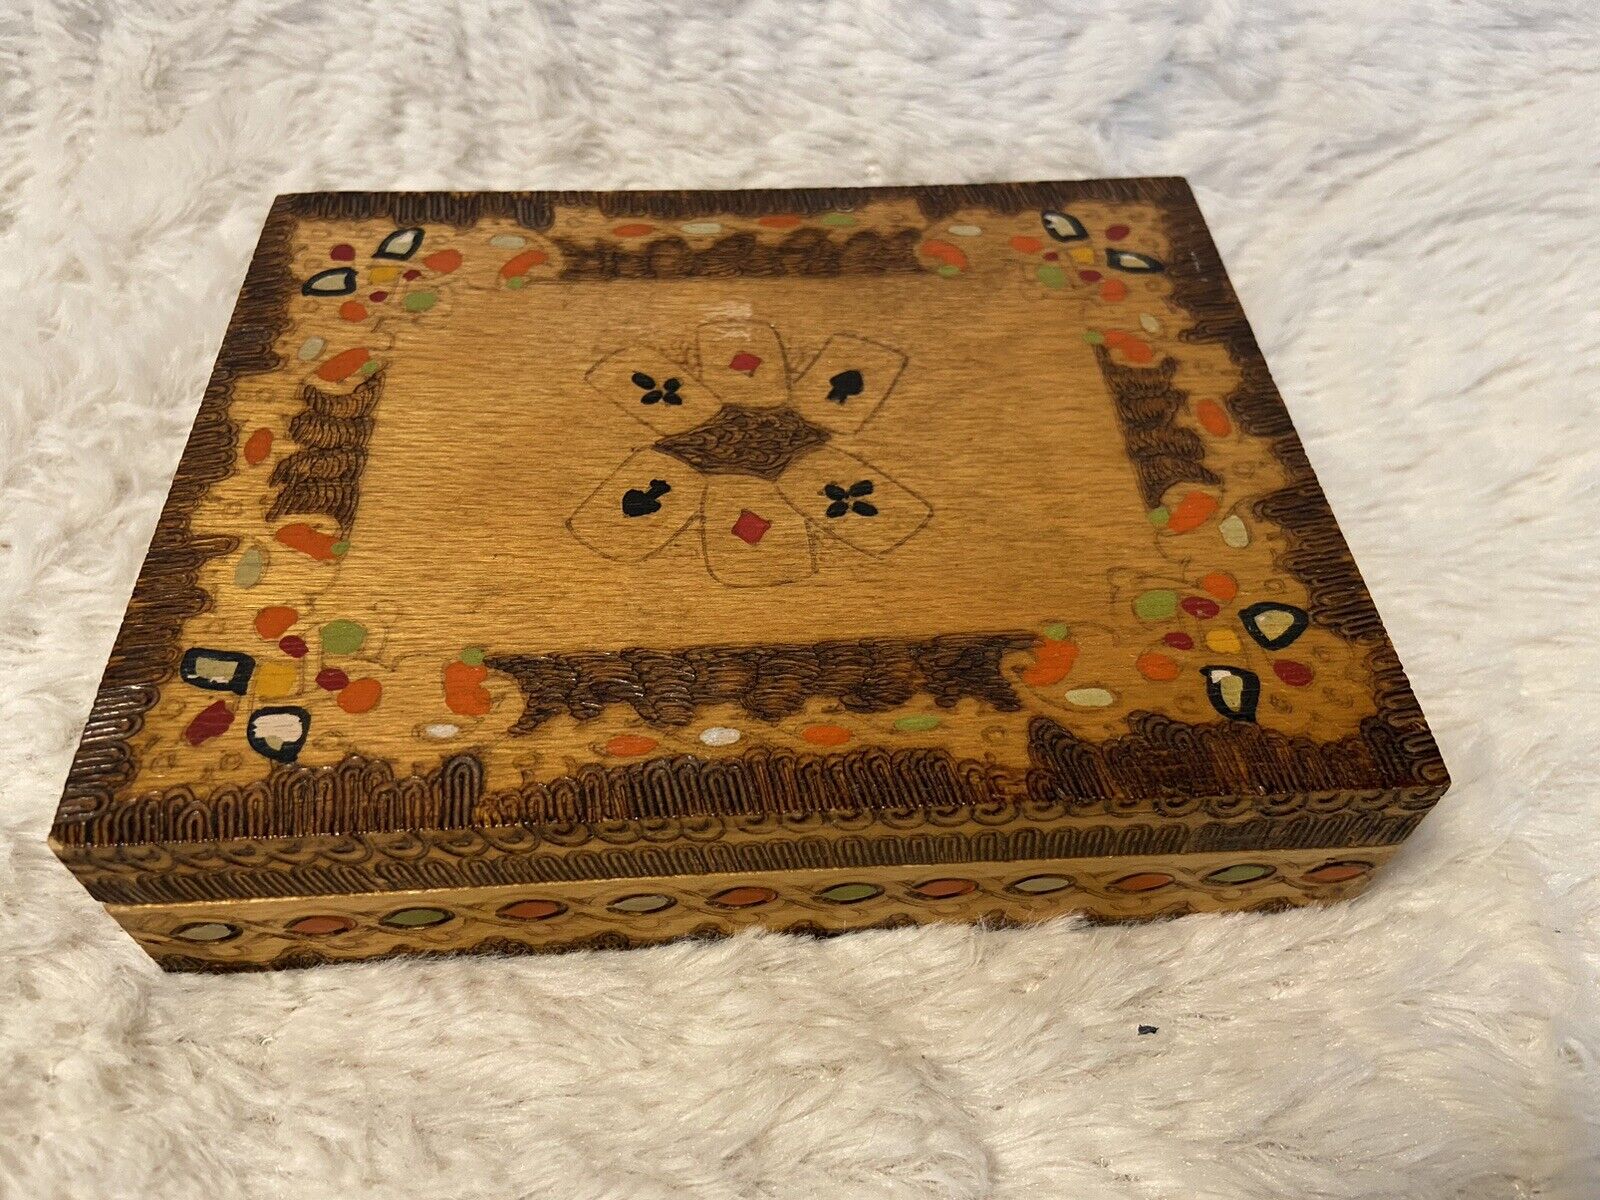 VTG Hand Made  WOODEN PLAYING CARD BOX, WITH VTG cards, MADE IN BULGARIA